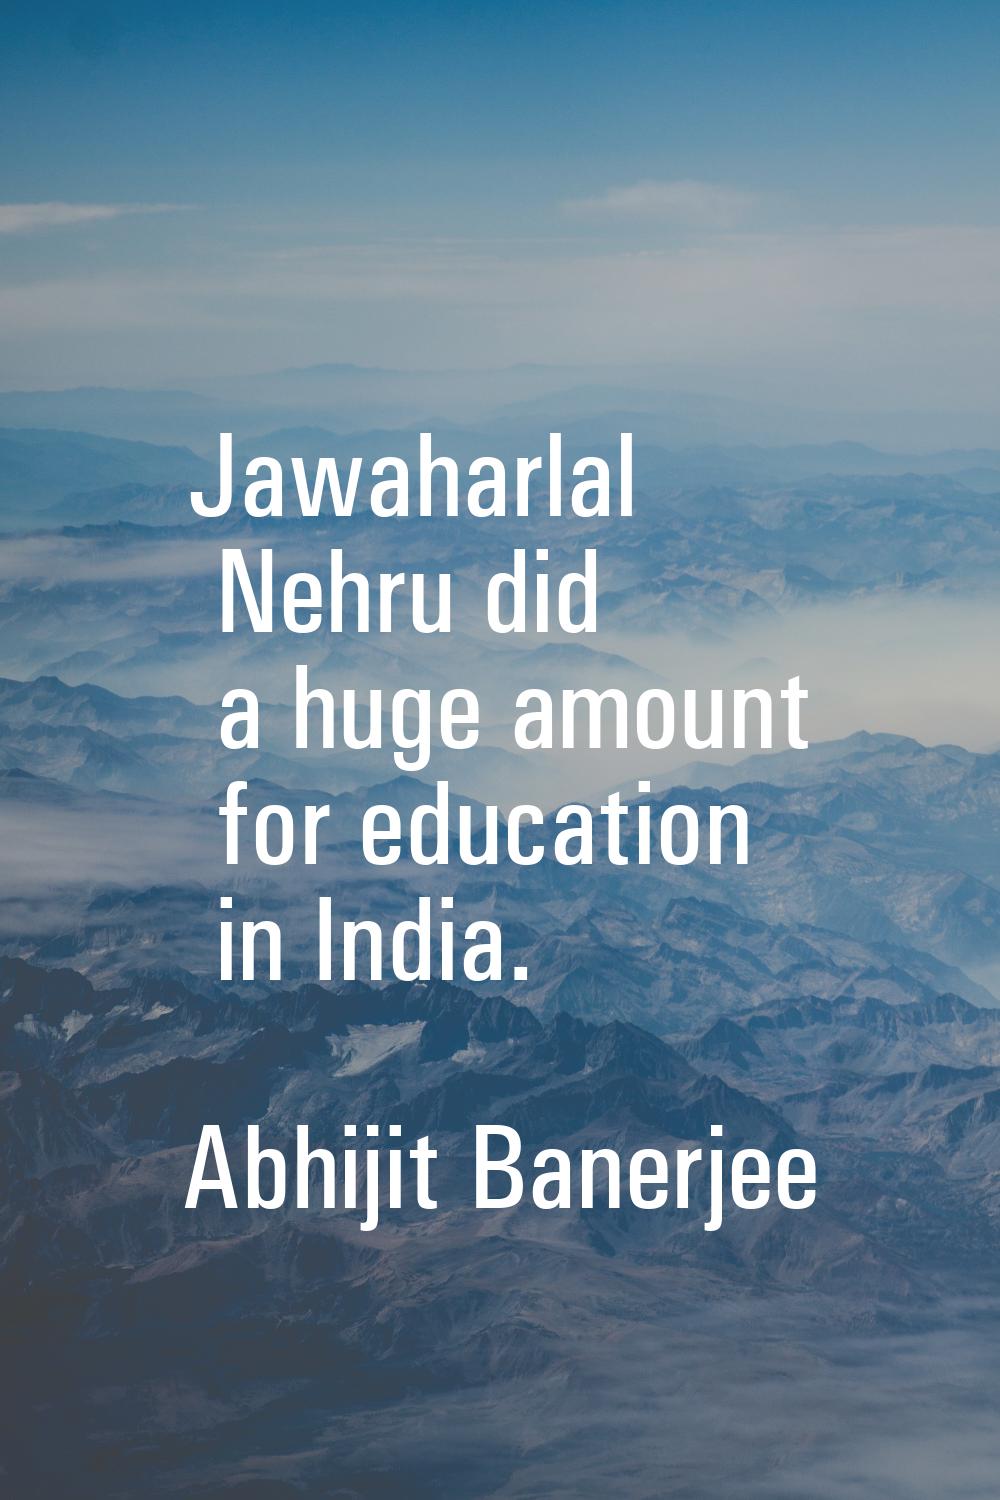 Jawaharlal Nehru did a huge amount for education in India.